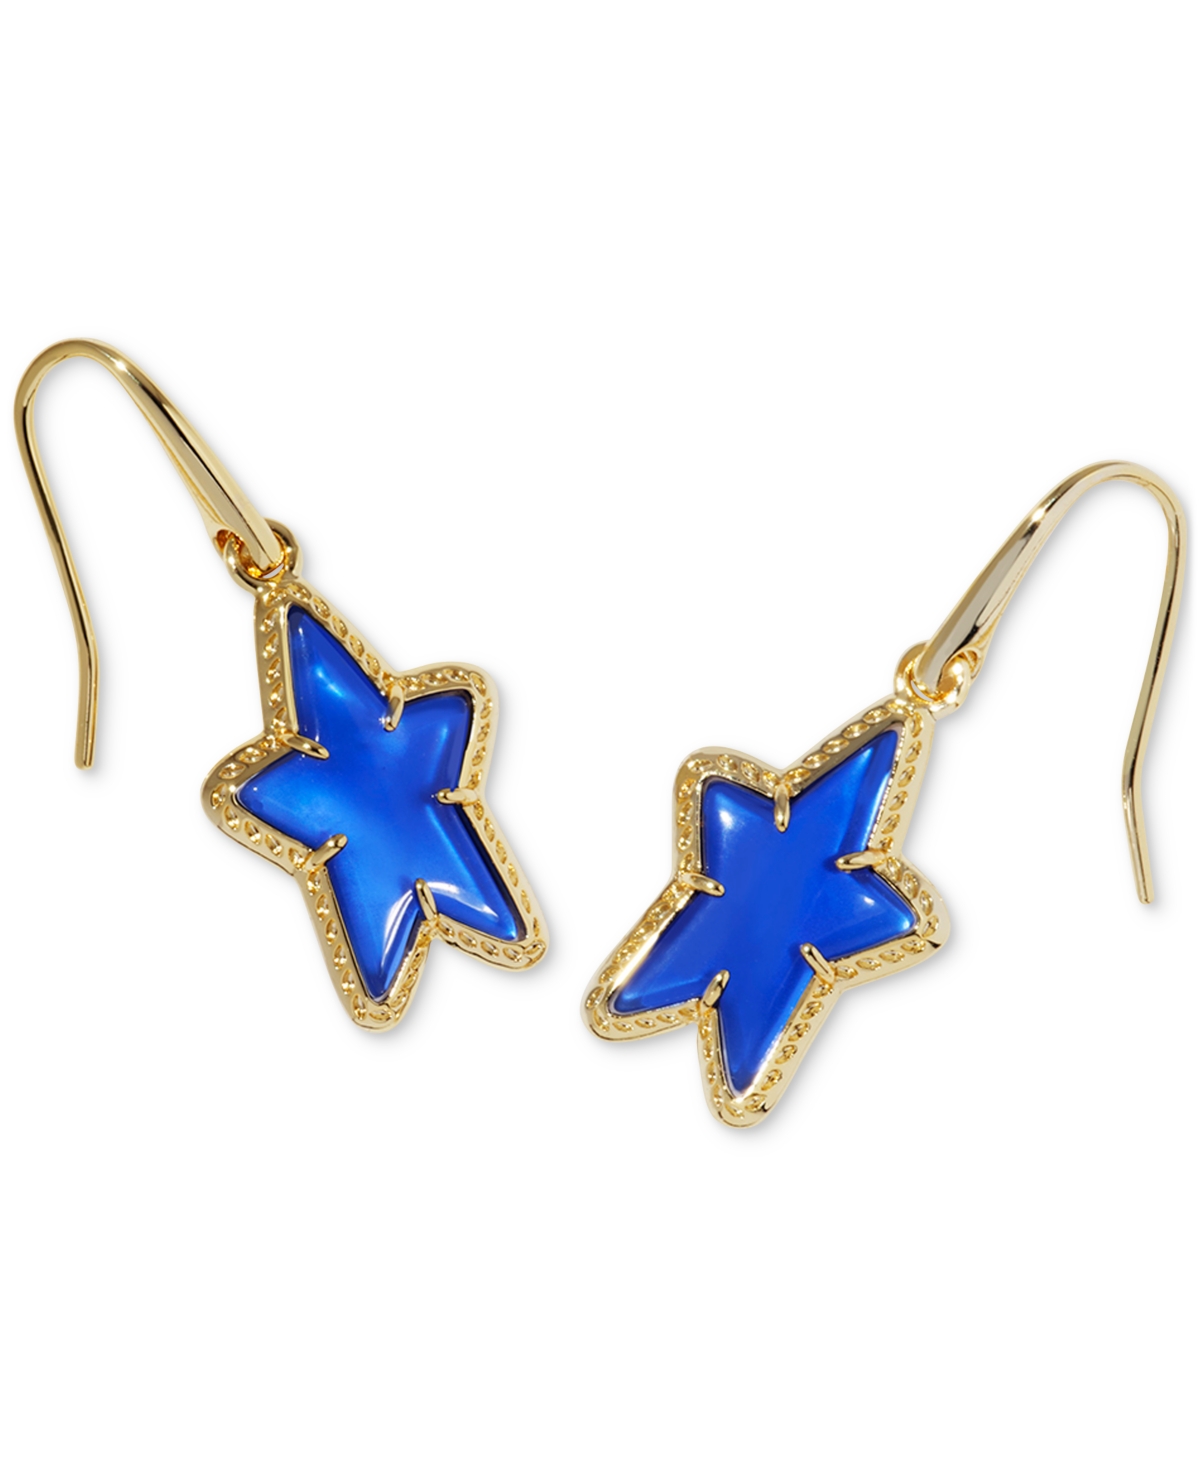 14k Gold-Plated Mother-of-Pearl Star Drop Earrings - Gld Cobalt